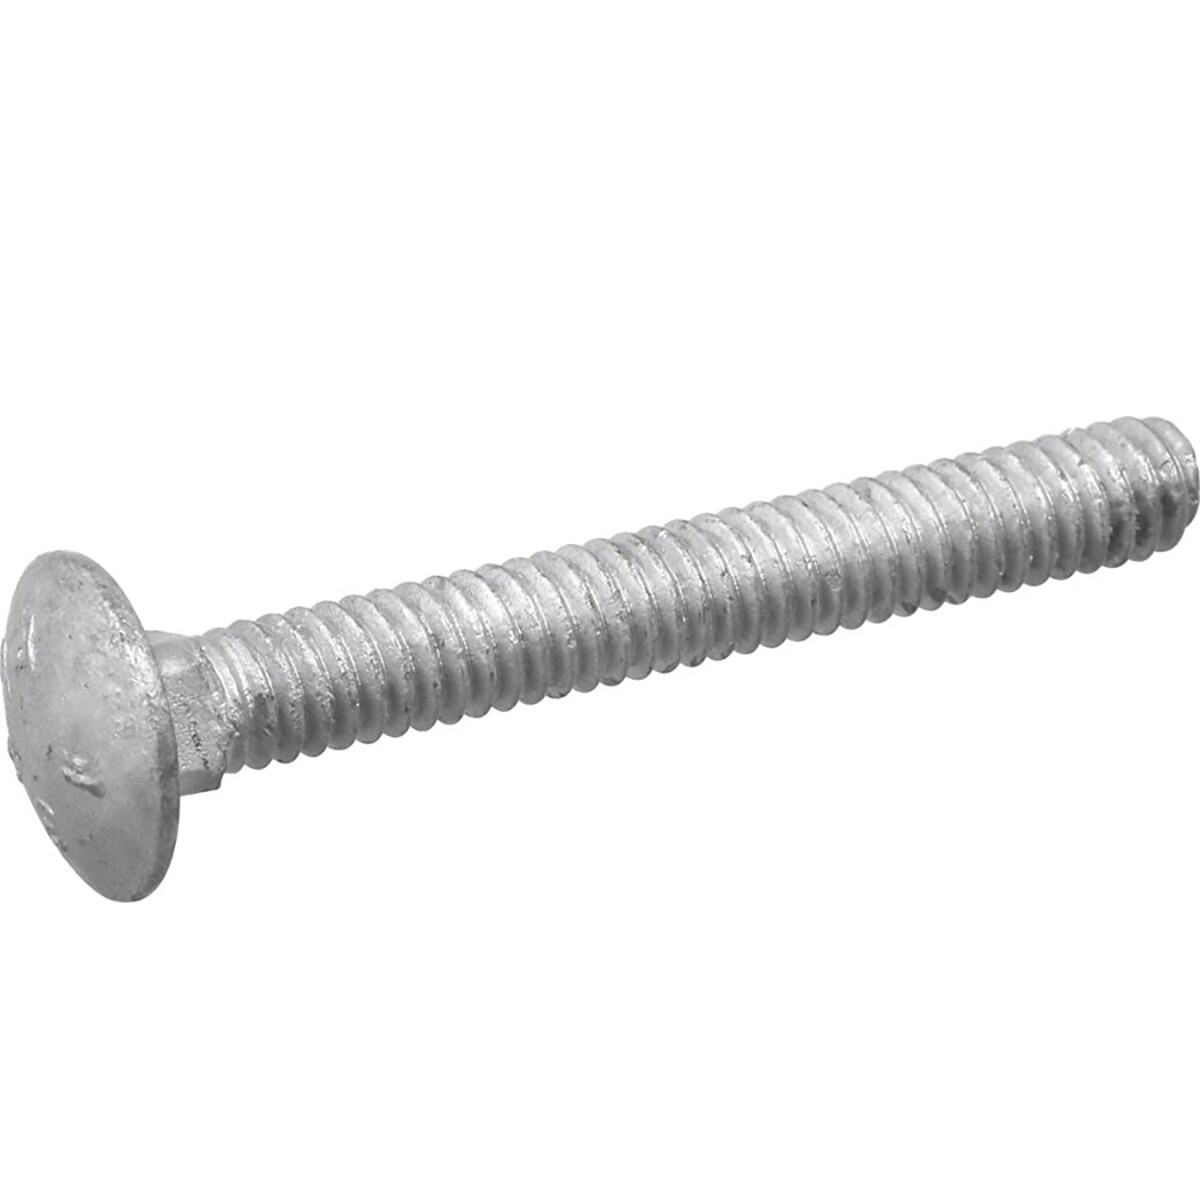 Carriage Bolts Hot Dipped Galvanized Grade 2 W/ Nuts 5/16-18 x 2'' Qty 25 